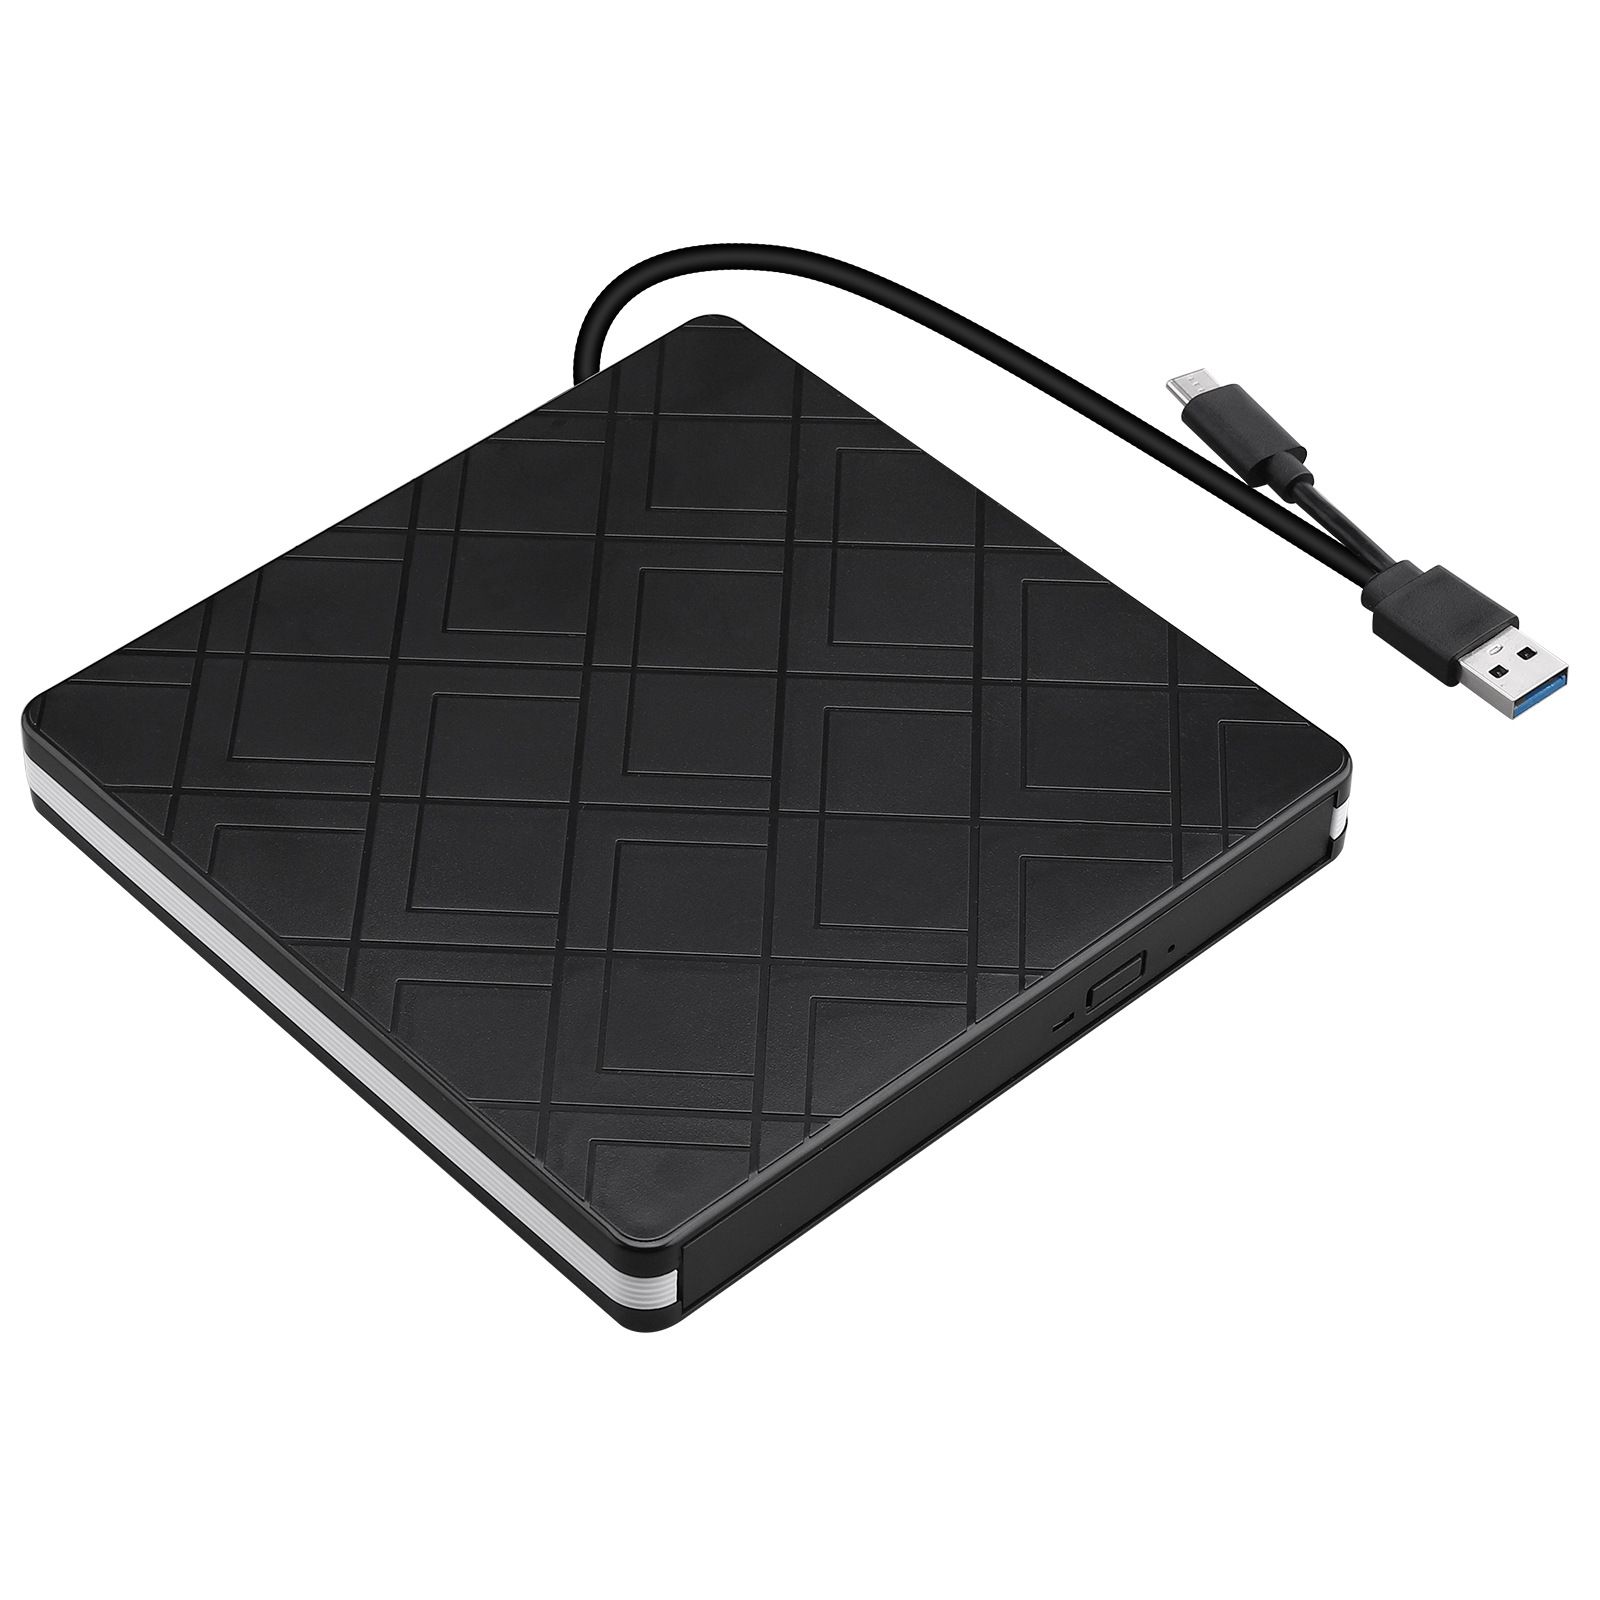 Cmaos-USB30-Type-C-External-Optical-Drive-CDDVD-Player-Burner-for-PCNotebook-in-HomeOutdoorWork-1748748